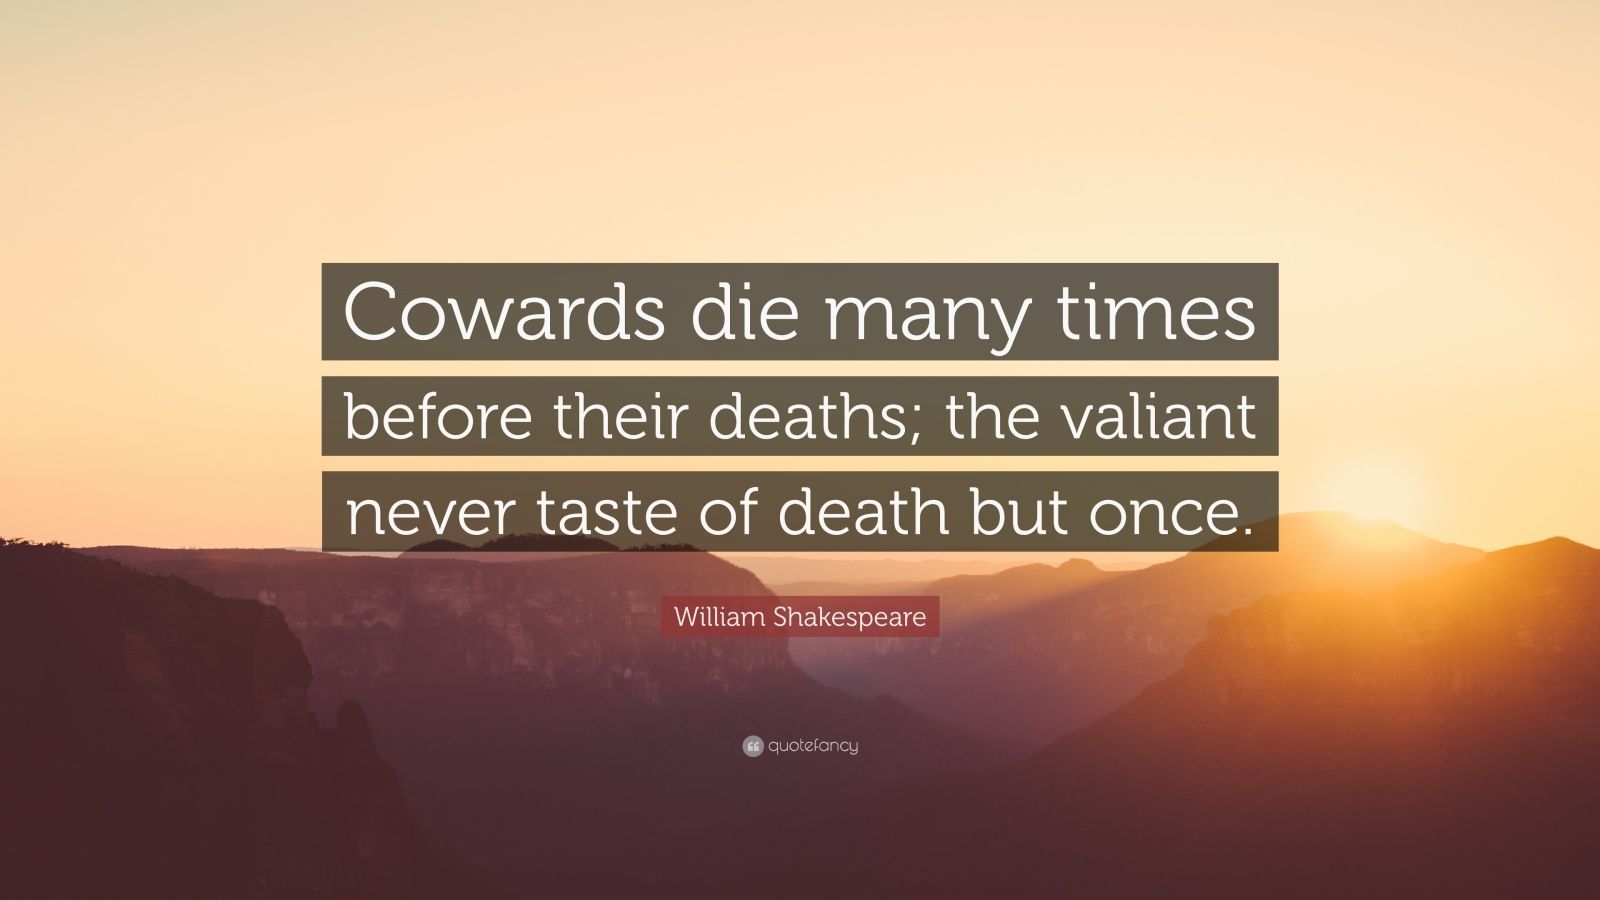 William Shakespeare Quote: "Cowards die many times before ...